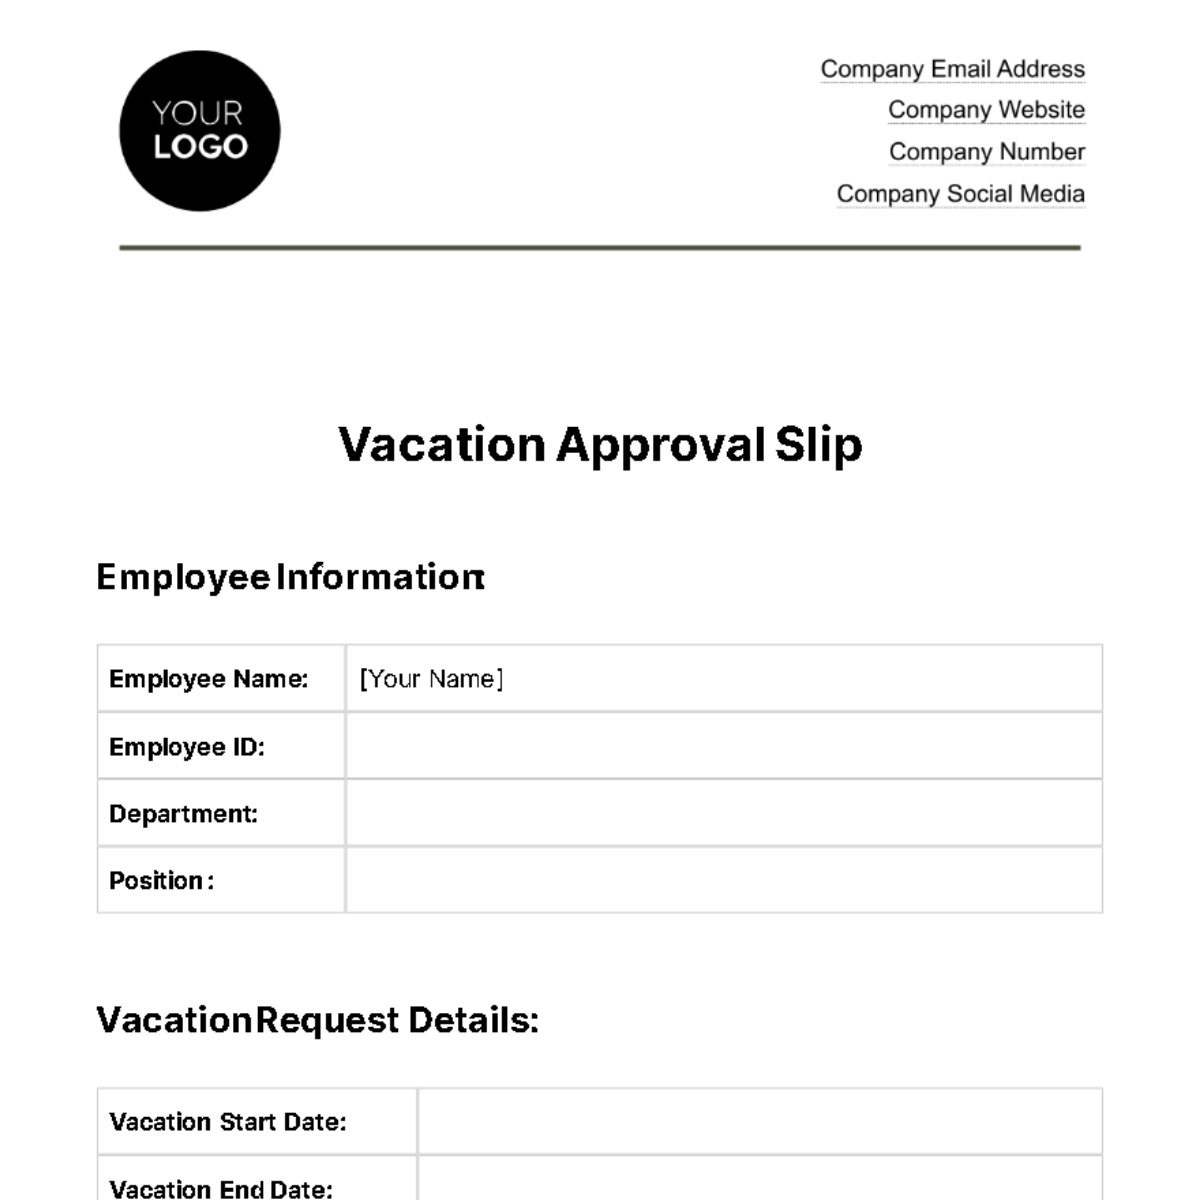 Vacation Approval Slip HR Template